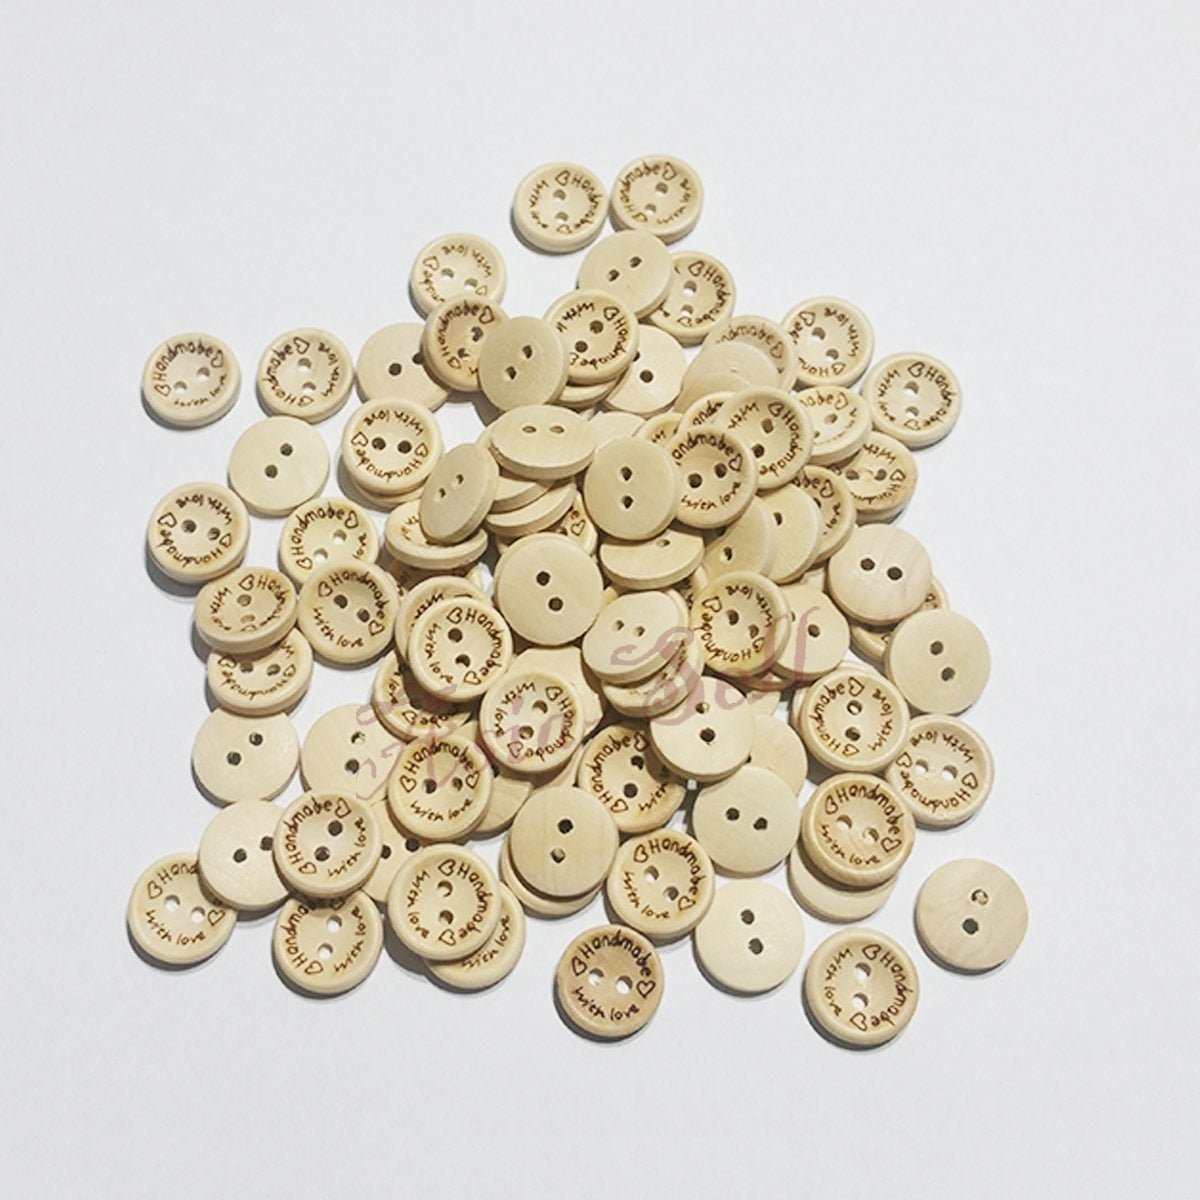 100pcs 15mm Buttons Handmade Clothes Handmade with Love Round Wooden Button - Asia Sell